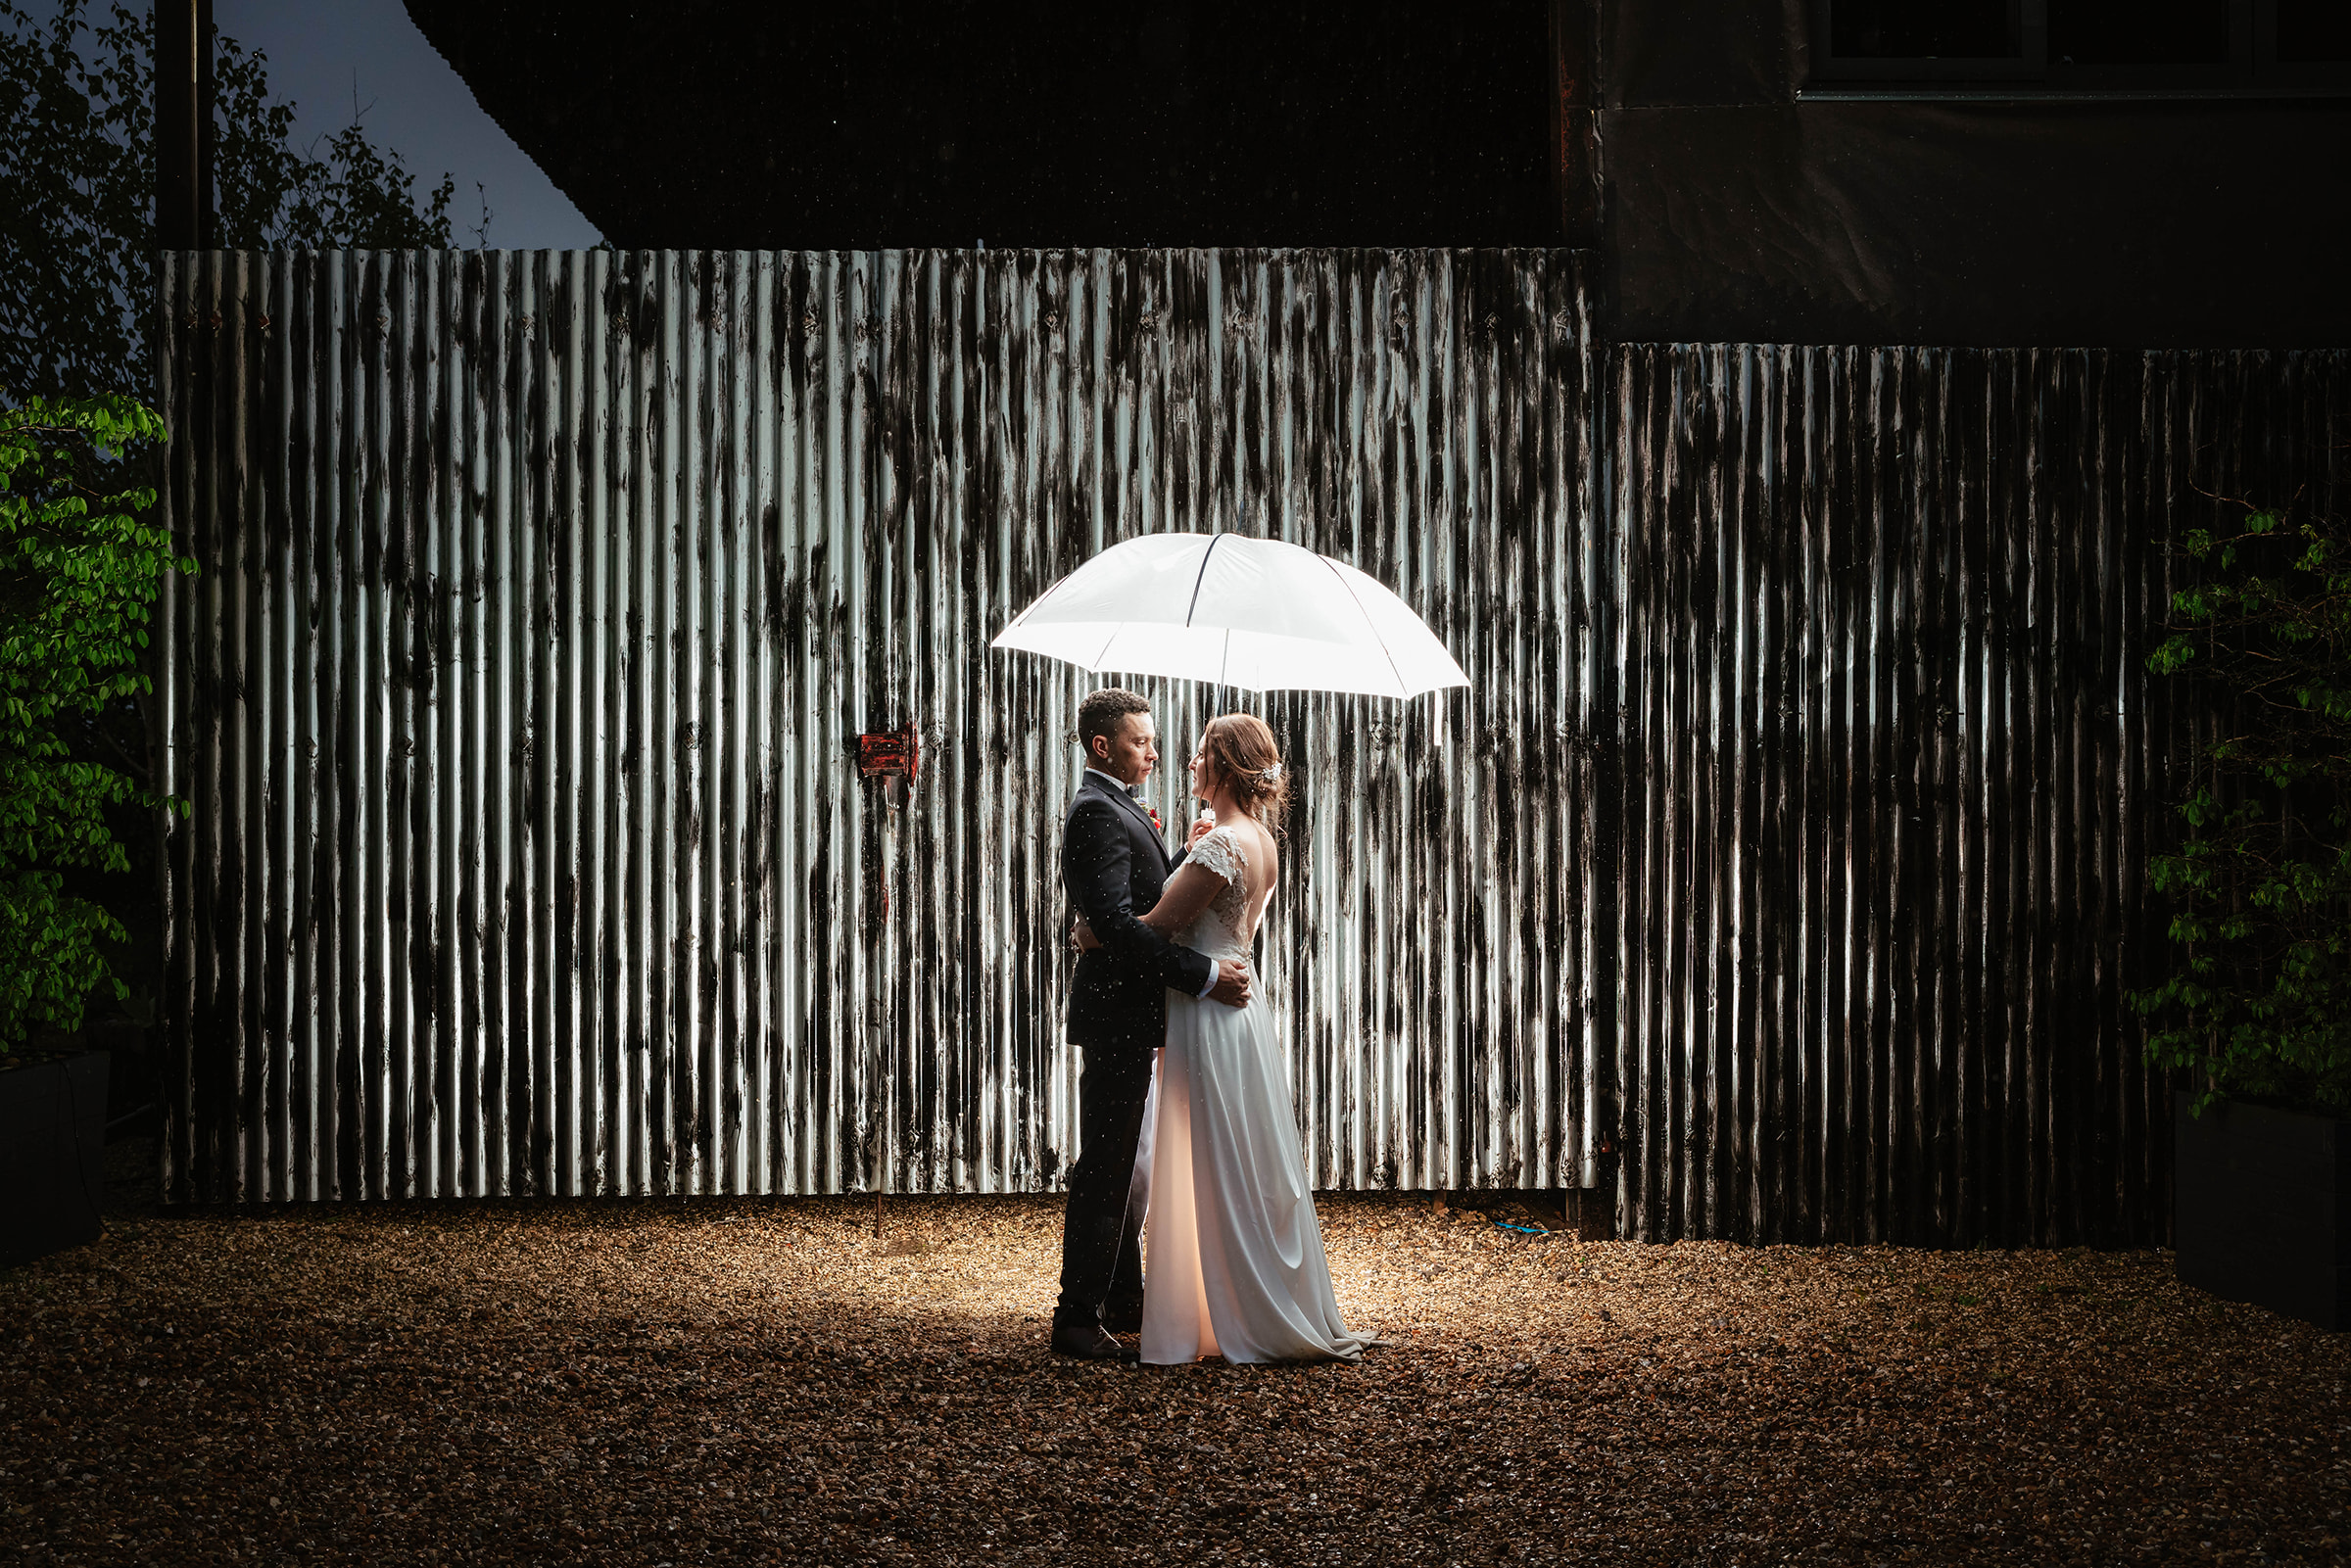 Rainy day wedding at Cripps Barn Cirencester Cotswolds